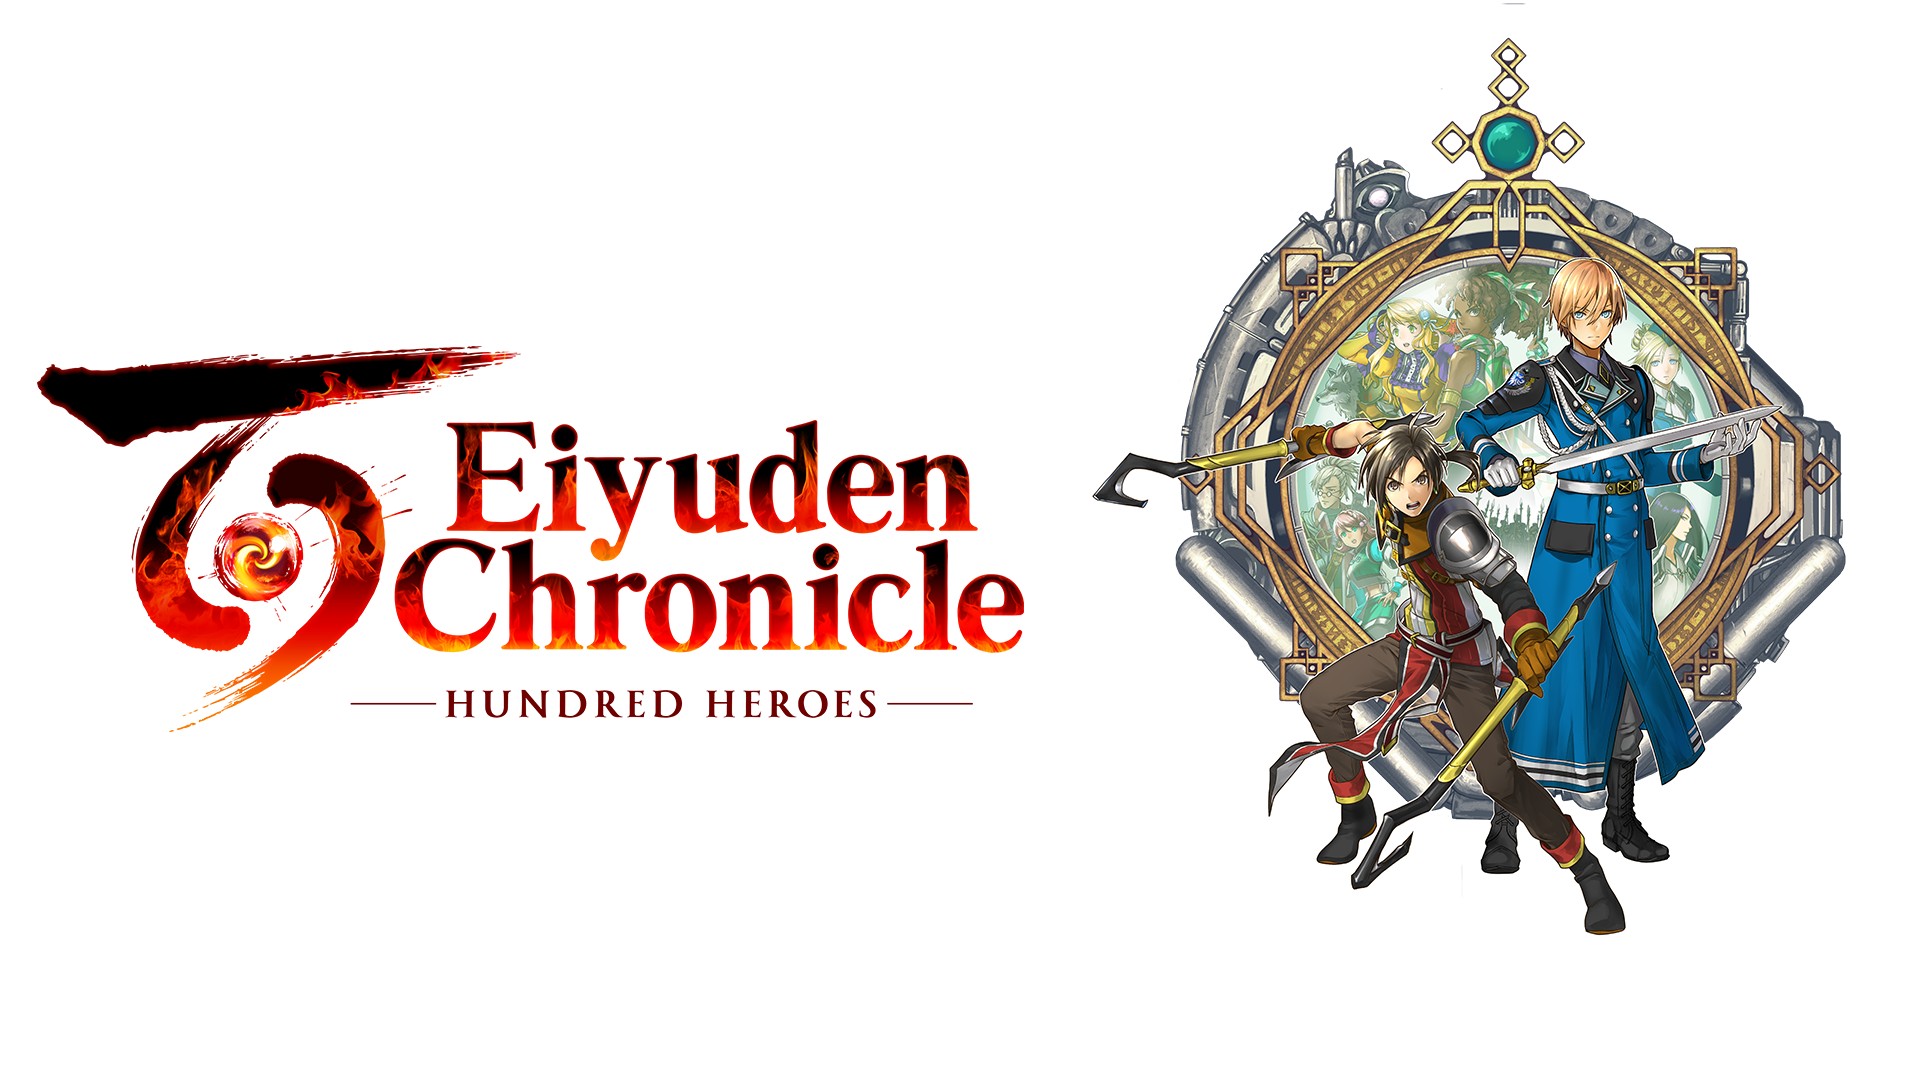 Eiyuden Chronicle: Hundred Heroes and Eiyuden Chronicle: Rising Coming to Xbox Game Pass